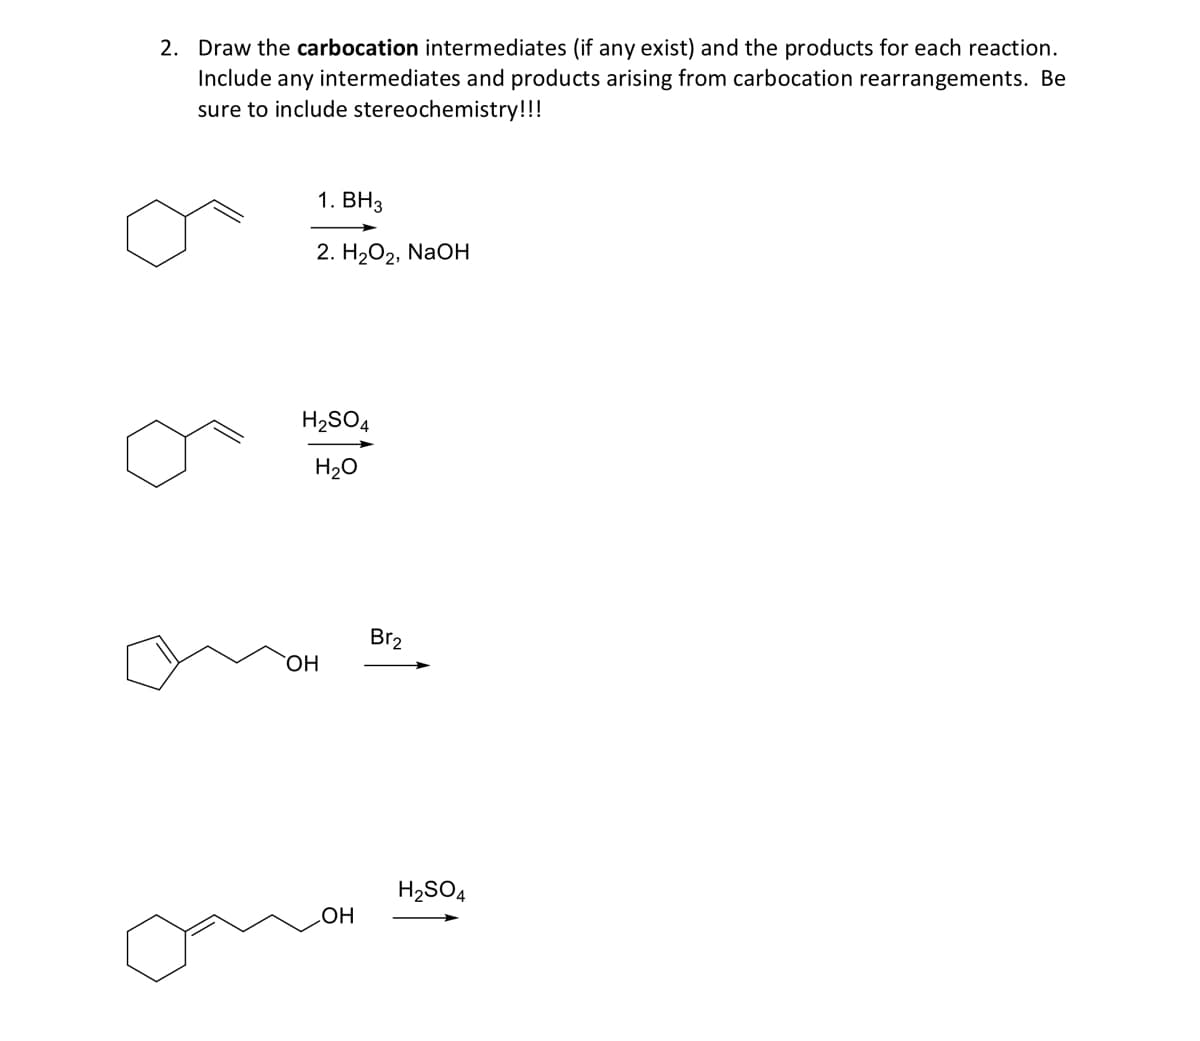 2. Draw the carbocation intermediates (if any exist) and the products for each reaction.
Include any intermediates and products arising from carbocation rearrangements. Be
sure to include stereochemistry!!!
1. ВНз
2. Н2О2, NaOн
H2SO4
H20
Br2
HO.
H2SO4
HOʻ
